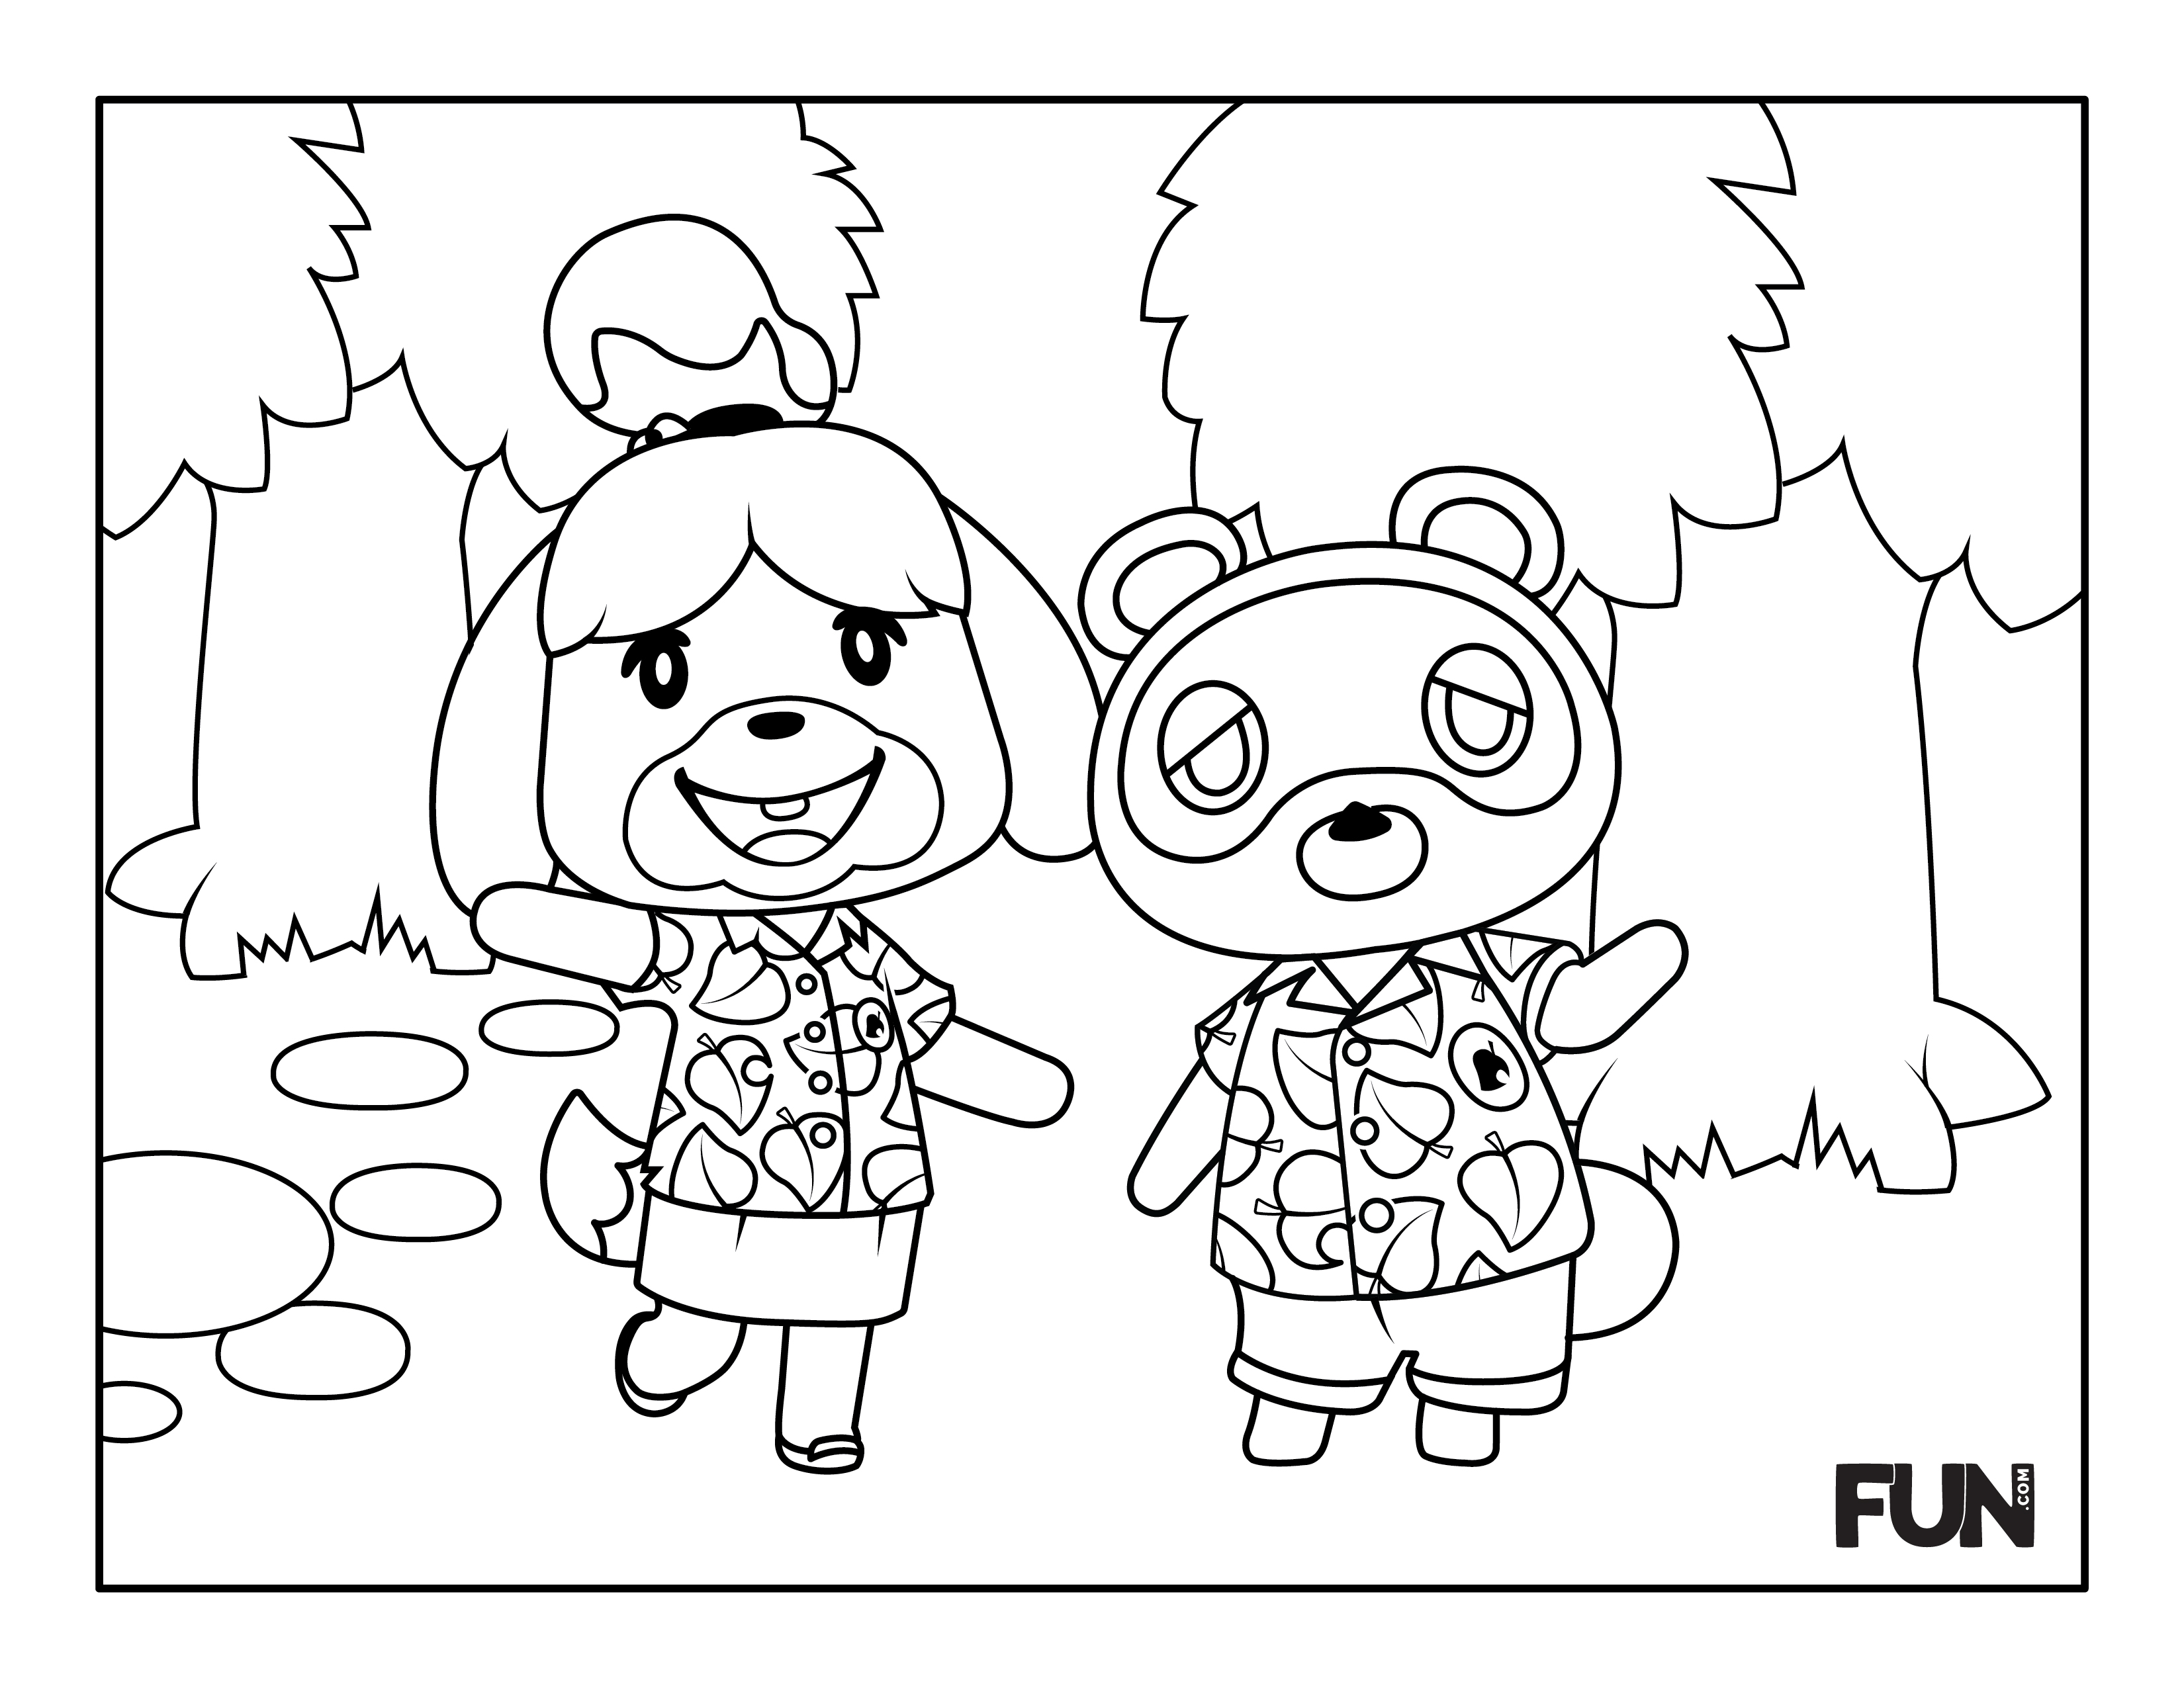 Animal Crossing coloring page